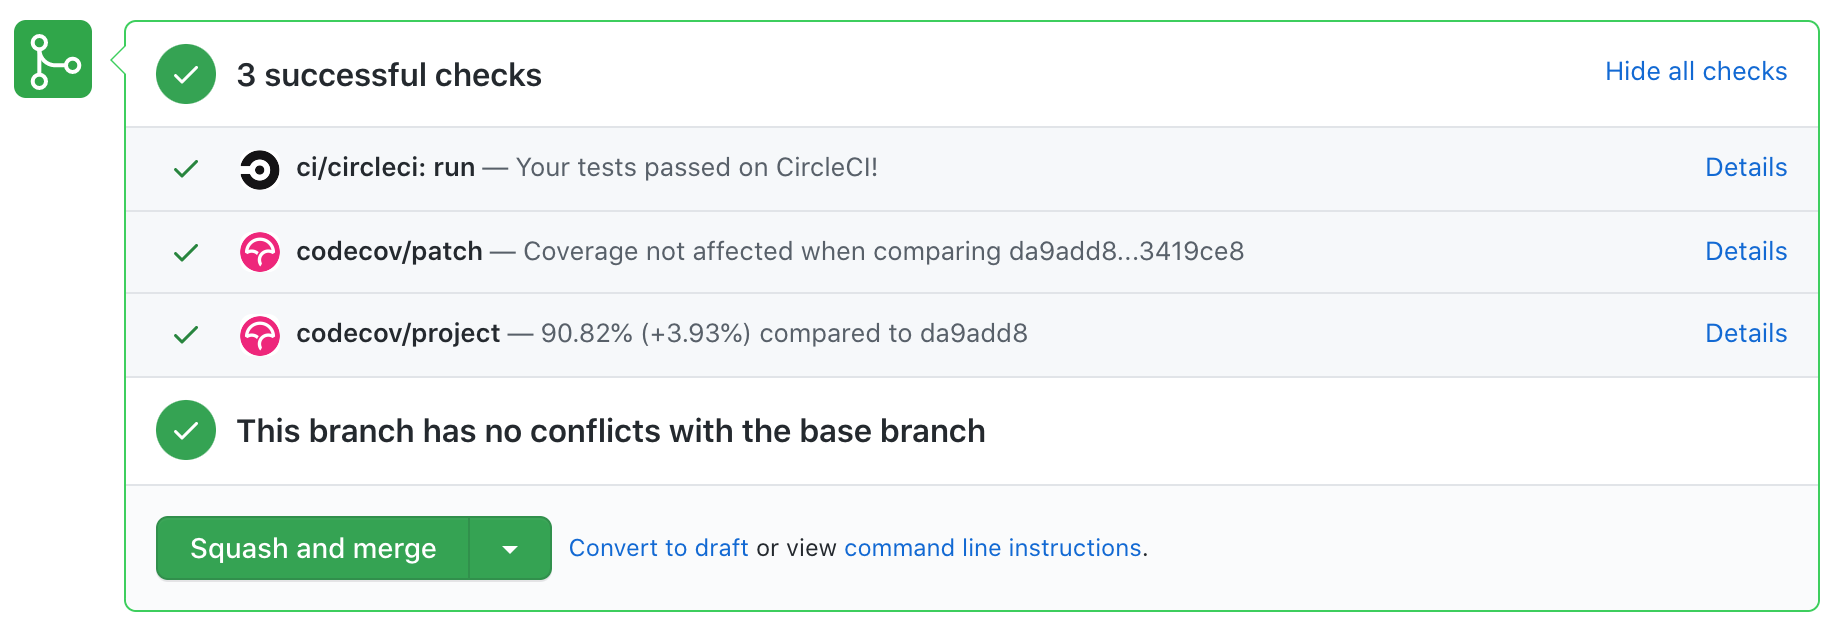 Clear completed todos pull request status checks